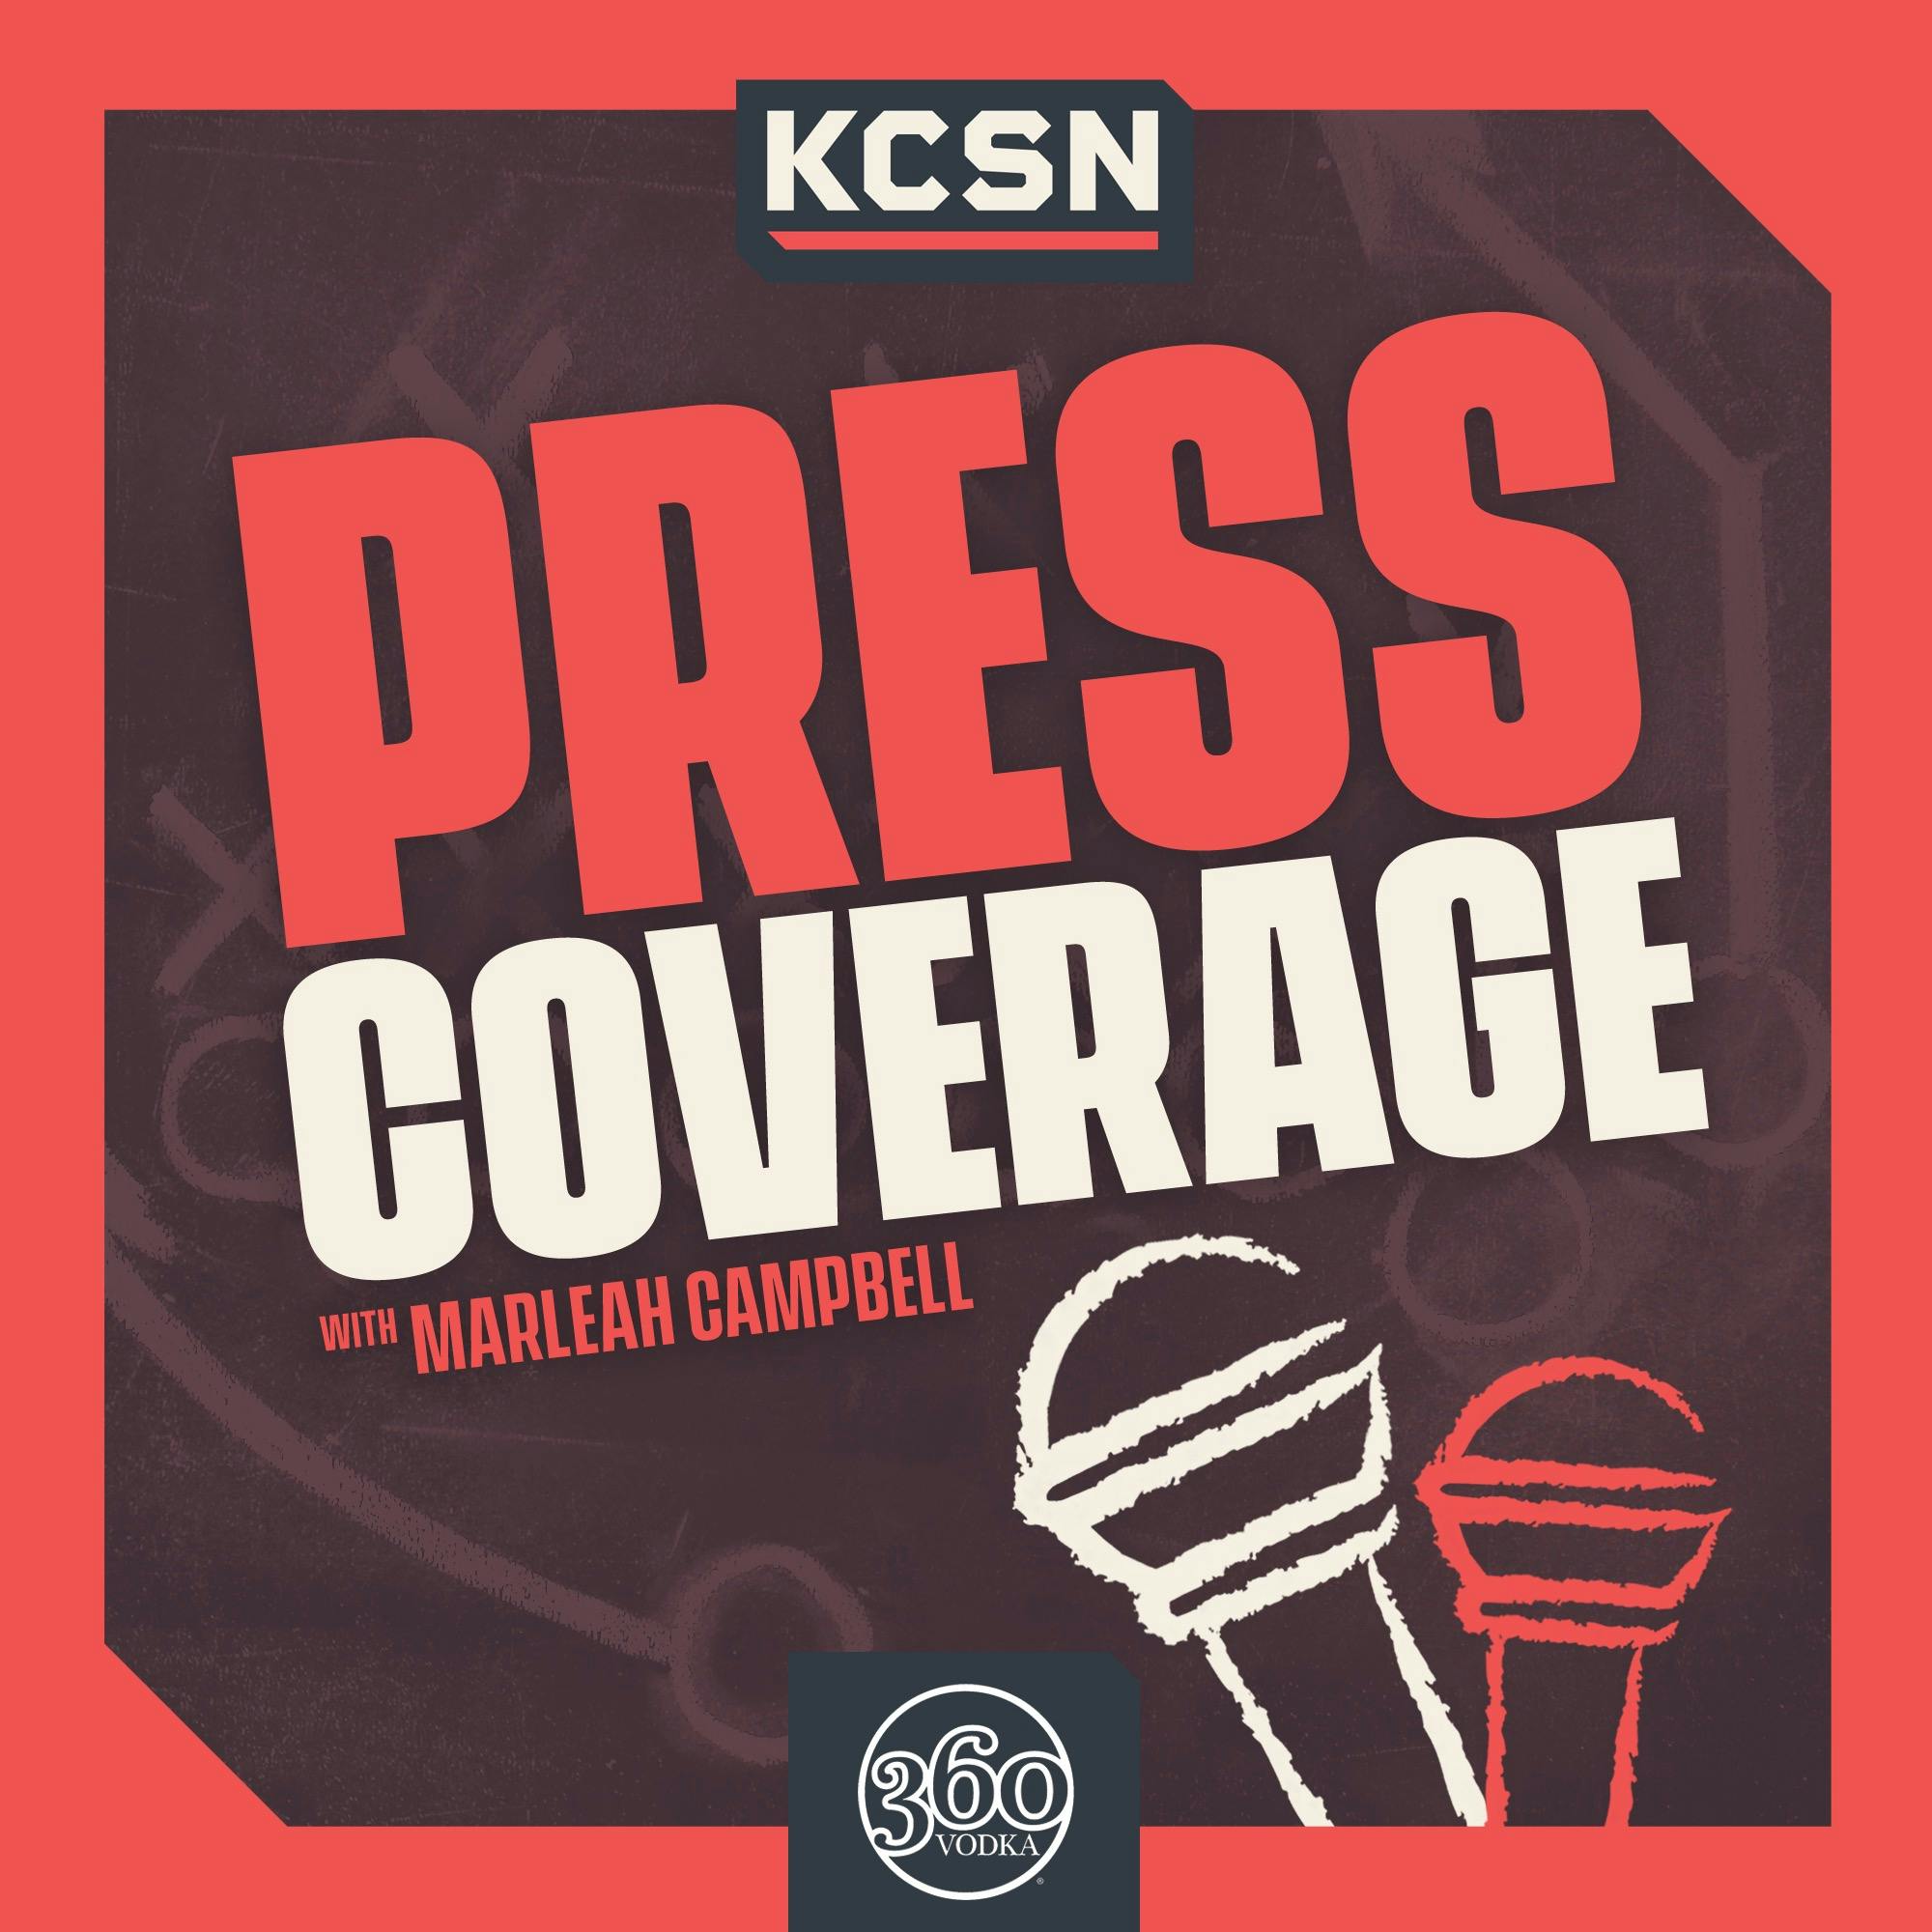 Chiefs Focused on Taking Care of Business vs. Broncos | Press Coverage 12/30